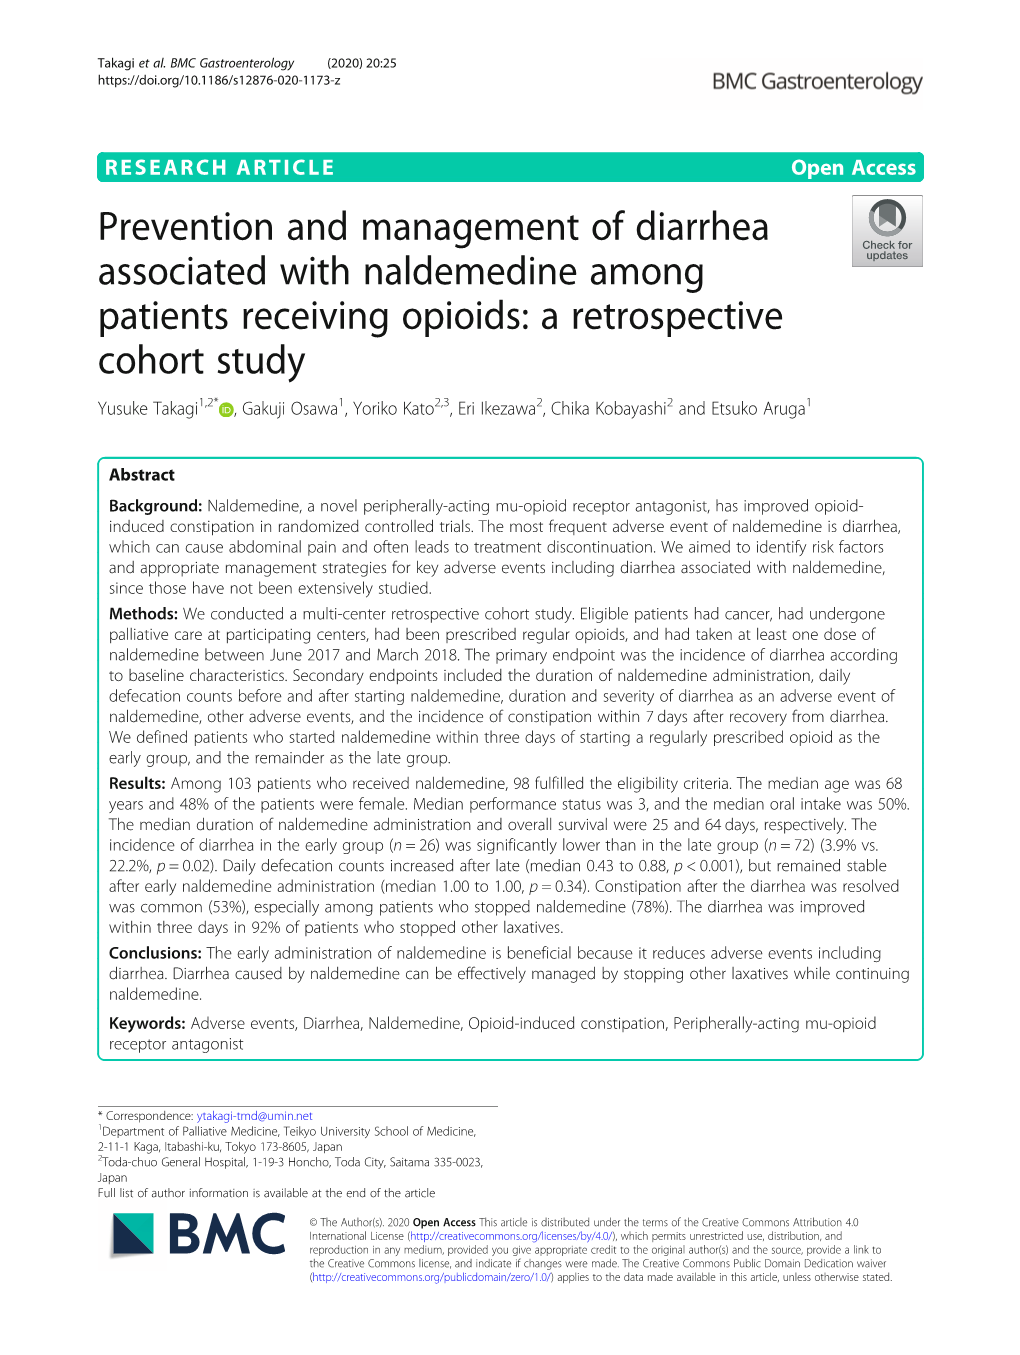 Prevention and Management of Diarrhea